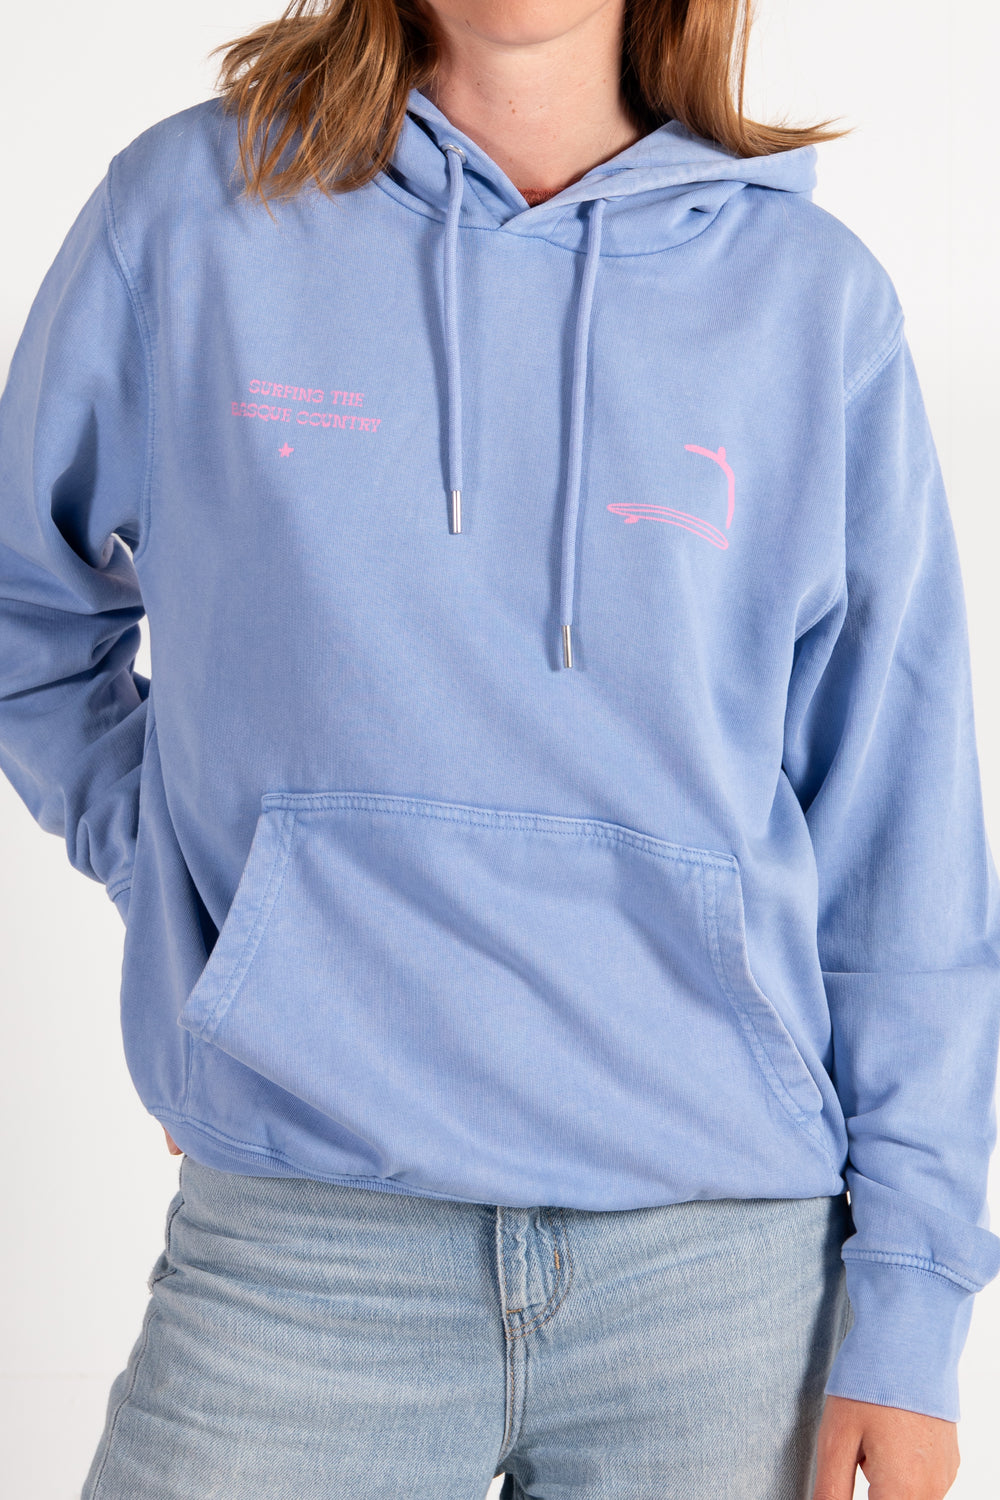 PUKAS-SURF-SHOP-HOODIE-WOMAN-SURFING-THE-BASQUE-COUNTRY-CORRIENTES-BLUE